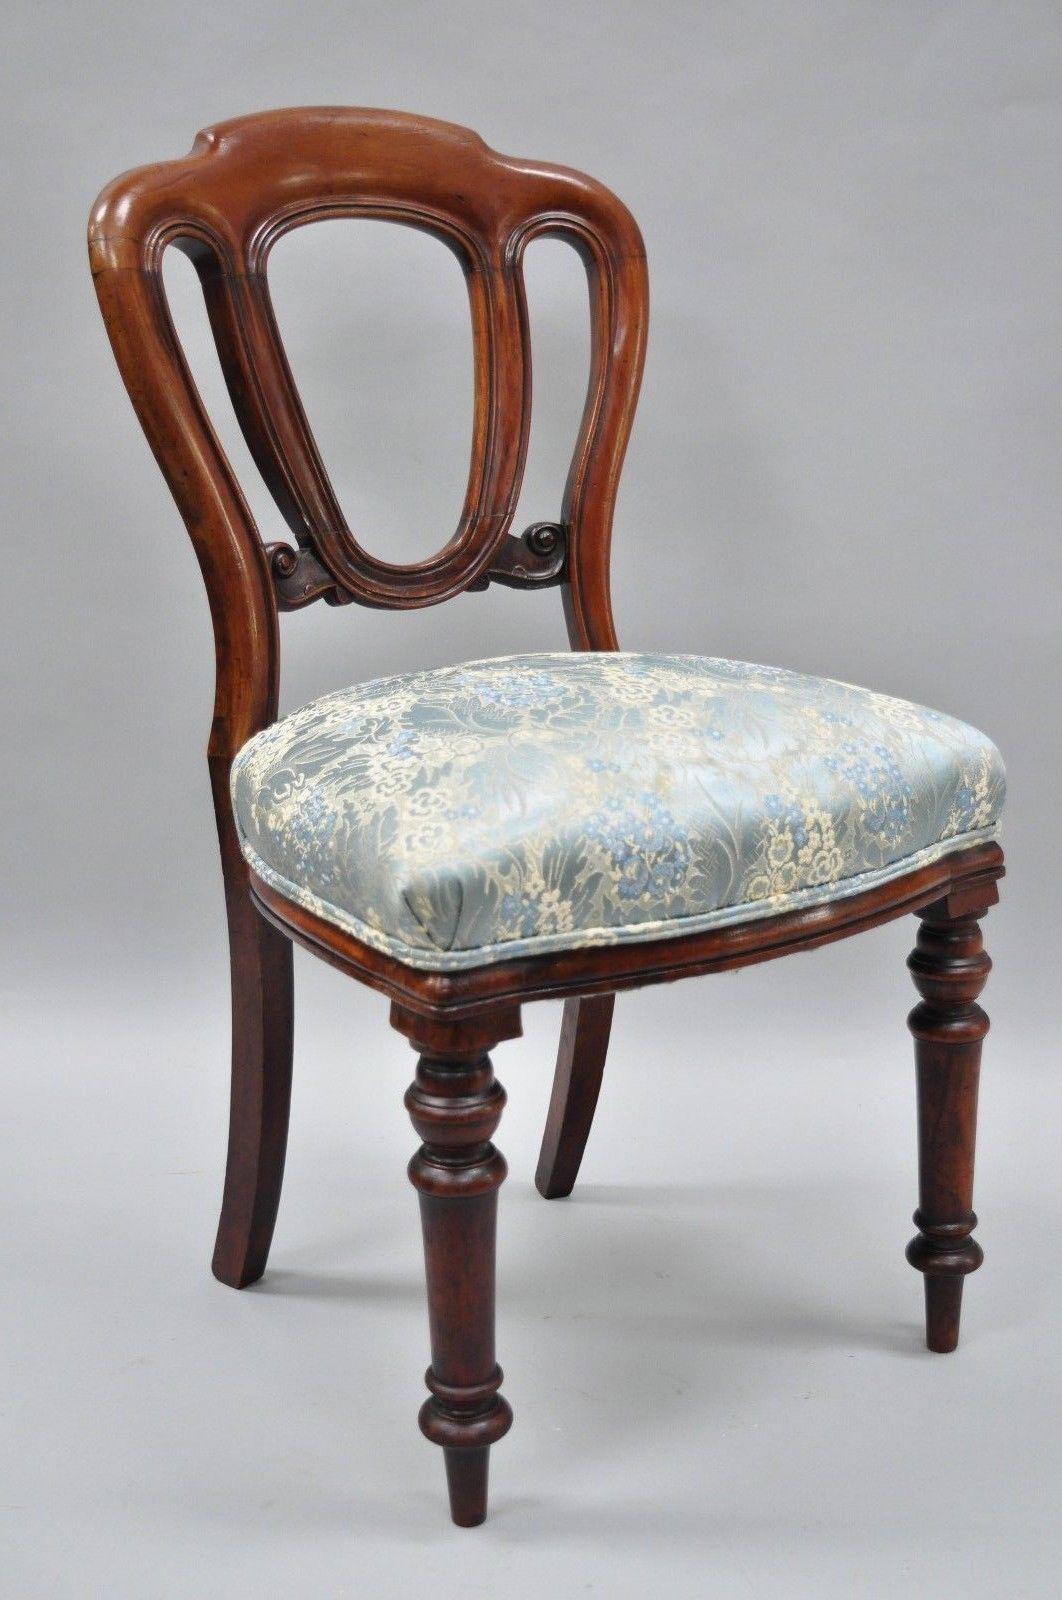 Pair of antique 19th century English Victorian solid mahogany chairs. Listing includes authentic warm patina, turn carved legs, heavy solid wood construction, beautiful wood grain, upholstered seats, nicely carved details, circa 19th century.